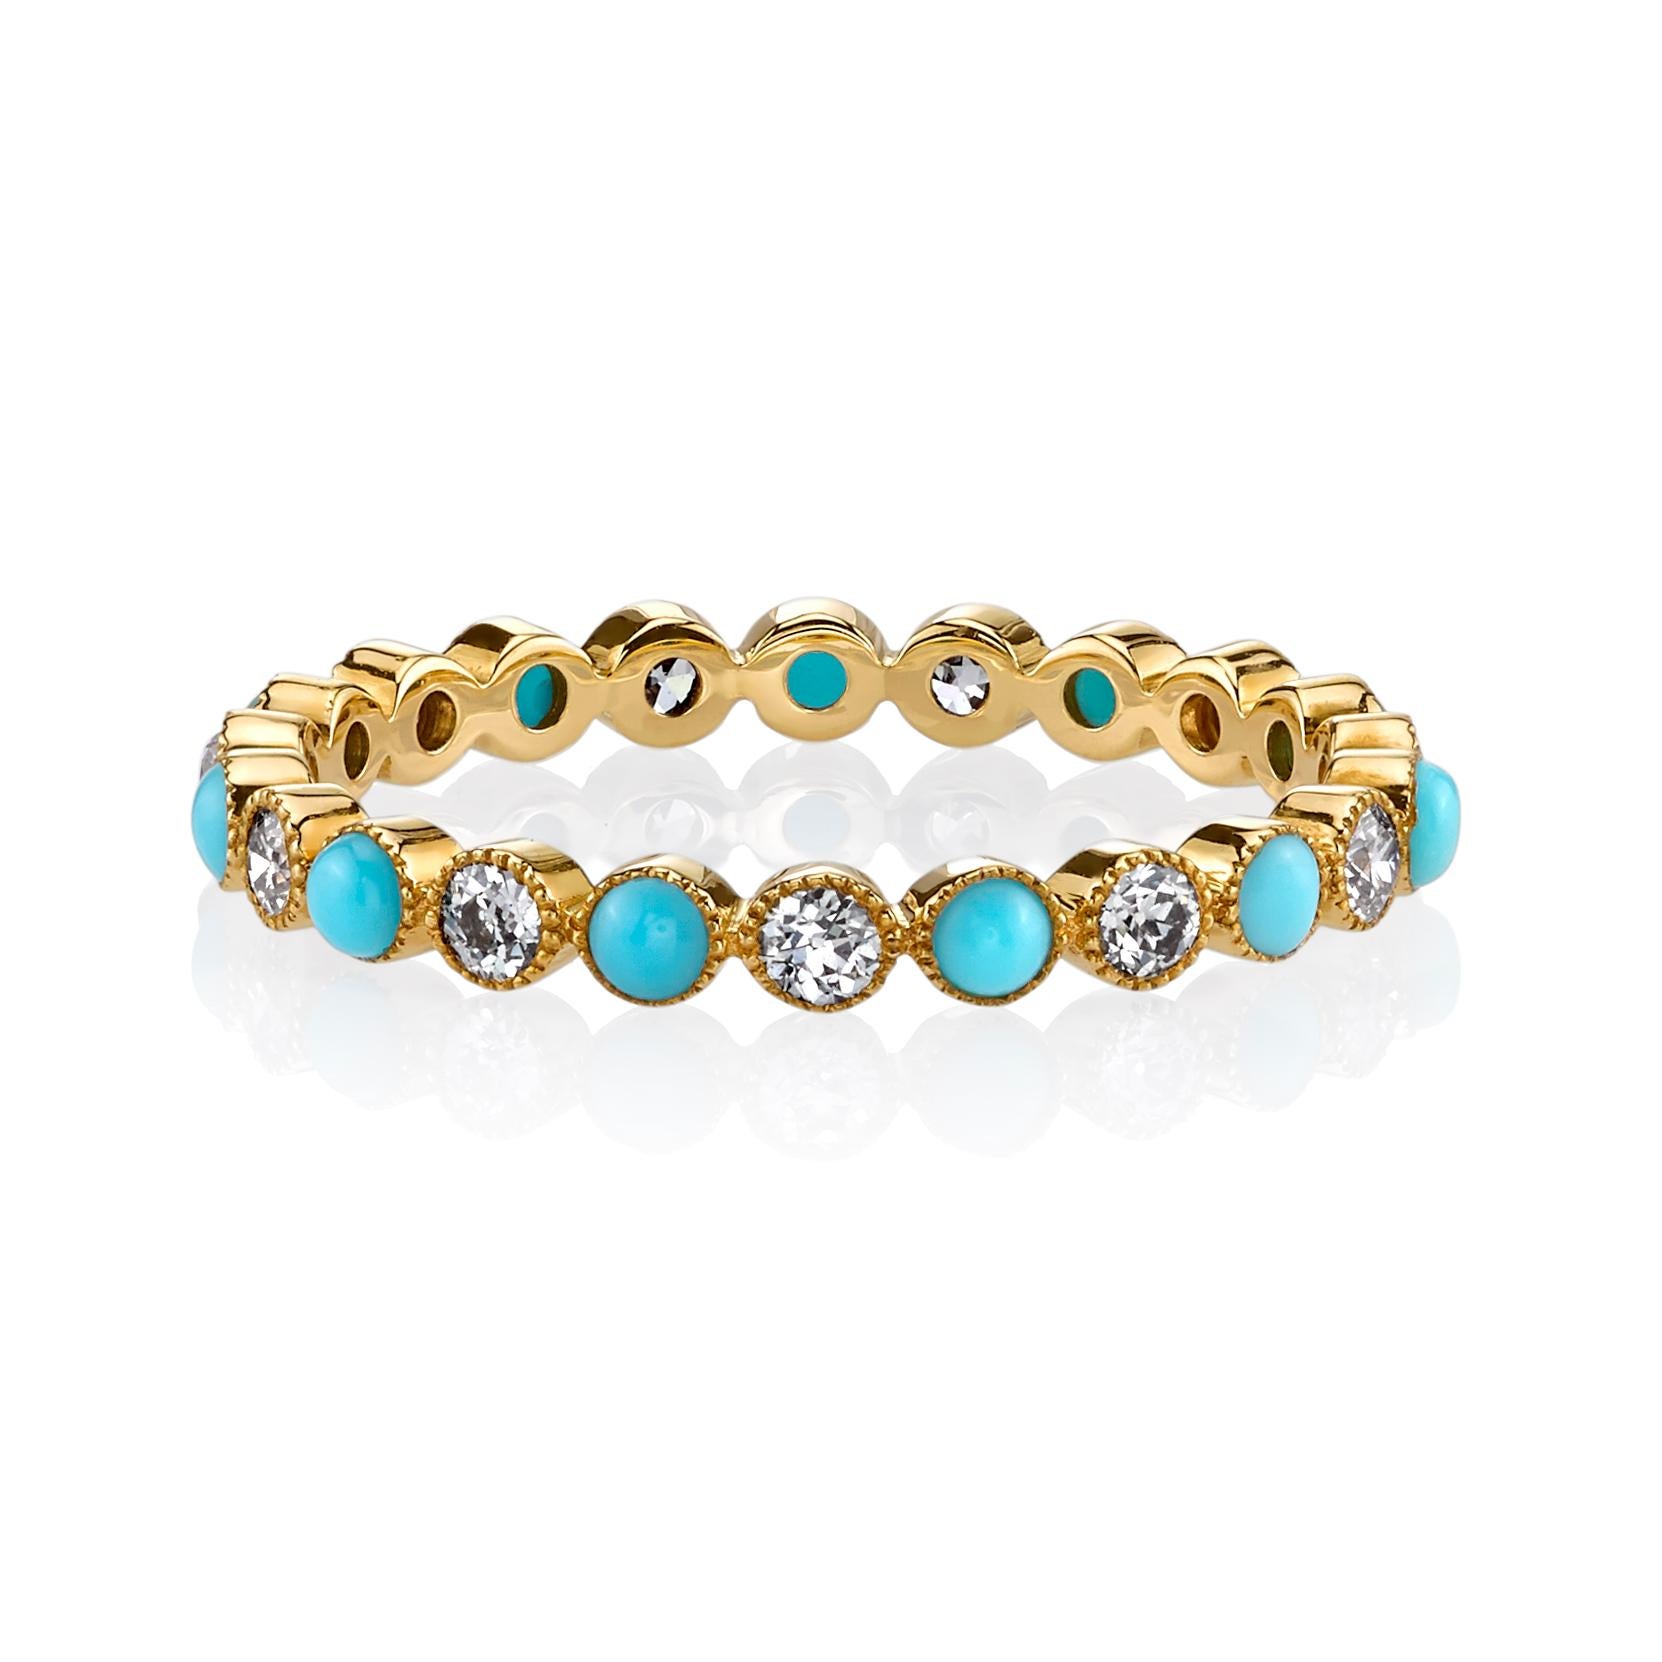 Approximately 0.32ctw Old European cut diamonds and Turquoise set in a handcrafted 18K gold eternity band. Price may vary according to total diamond weight. Available in mini and small sizes - photo shown is the mini size. Platinum price is up to a